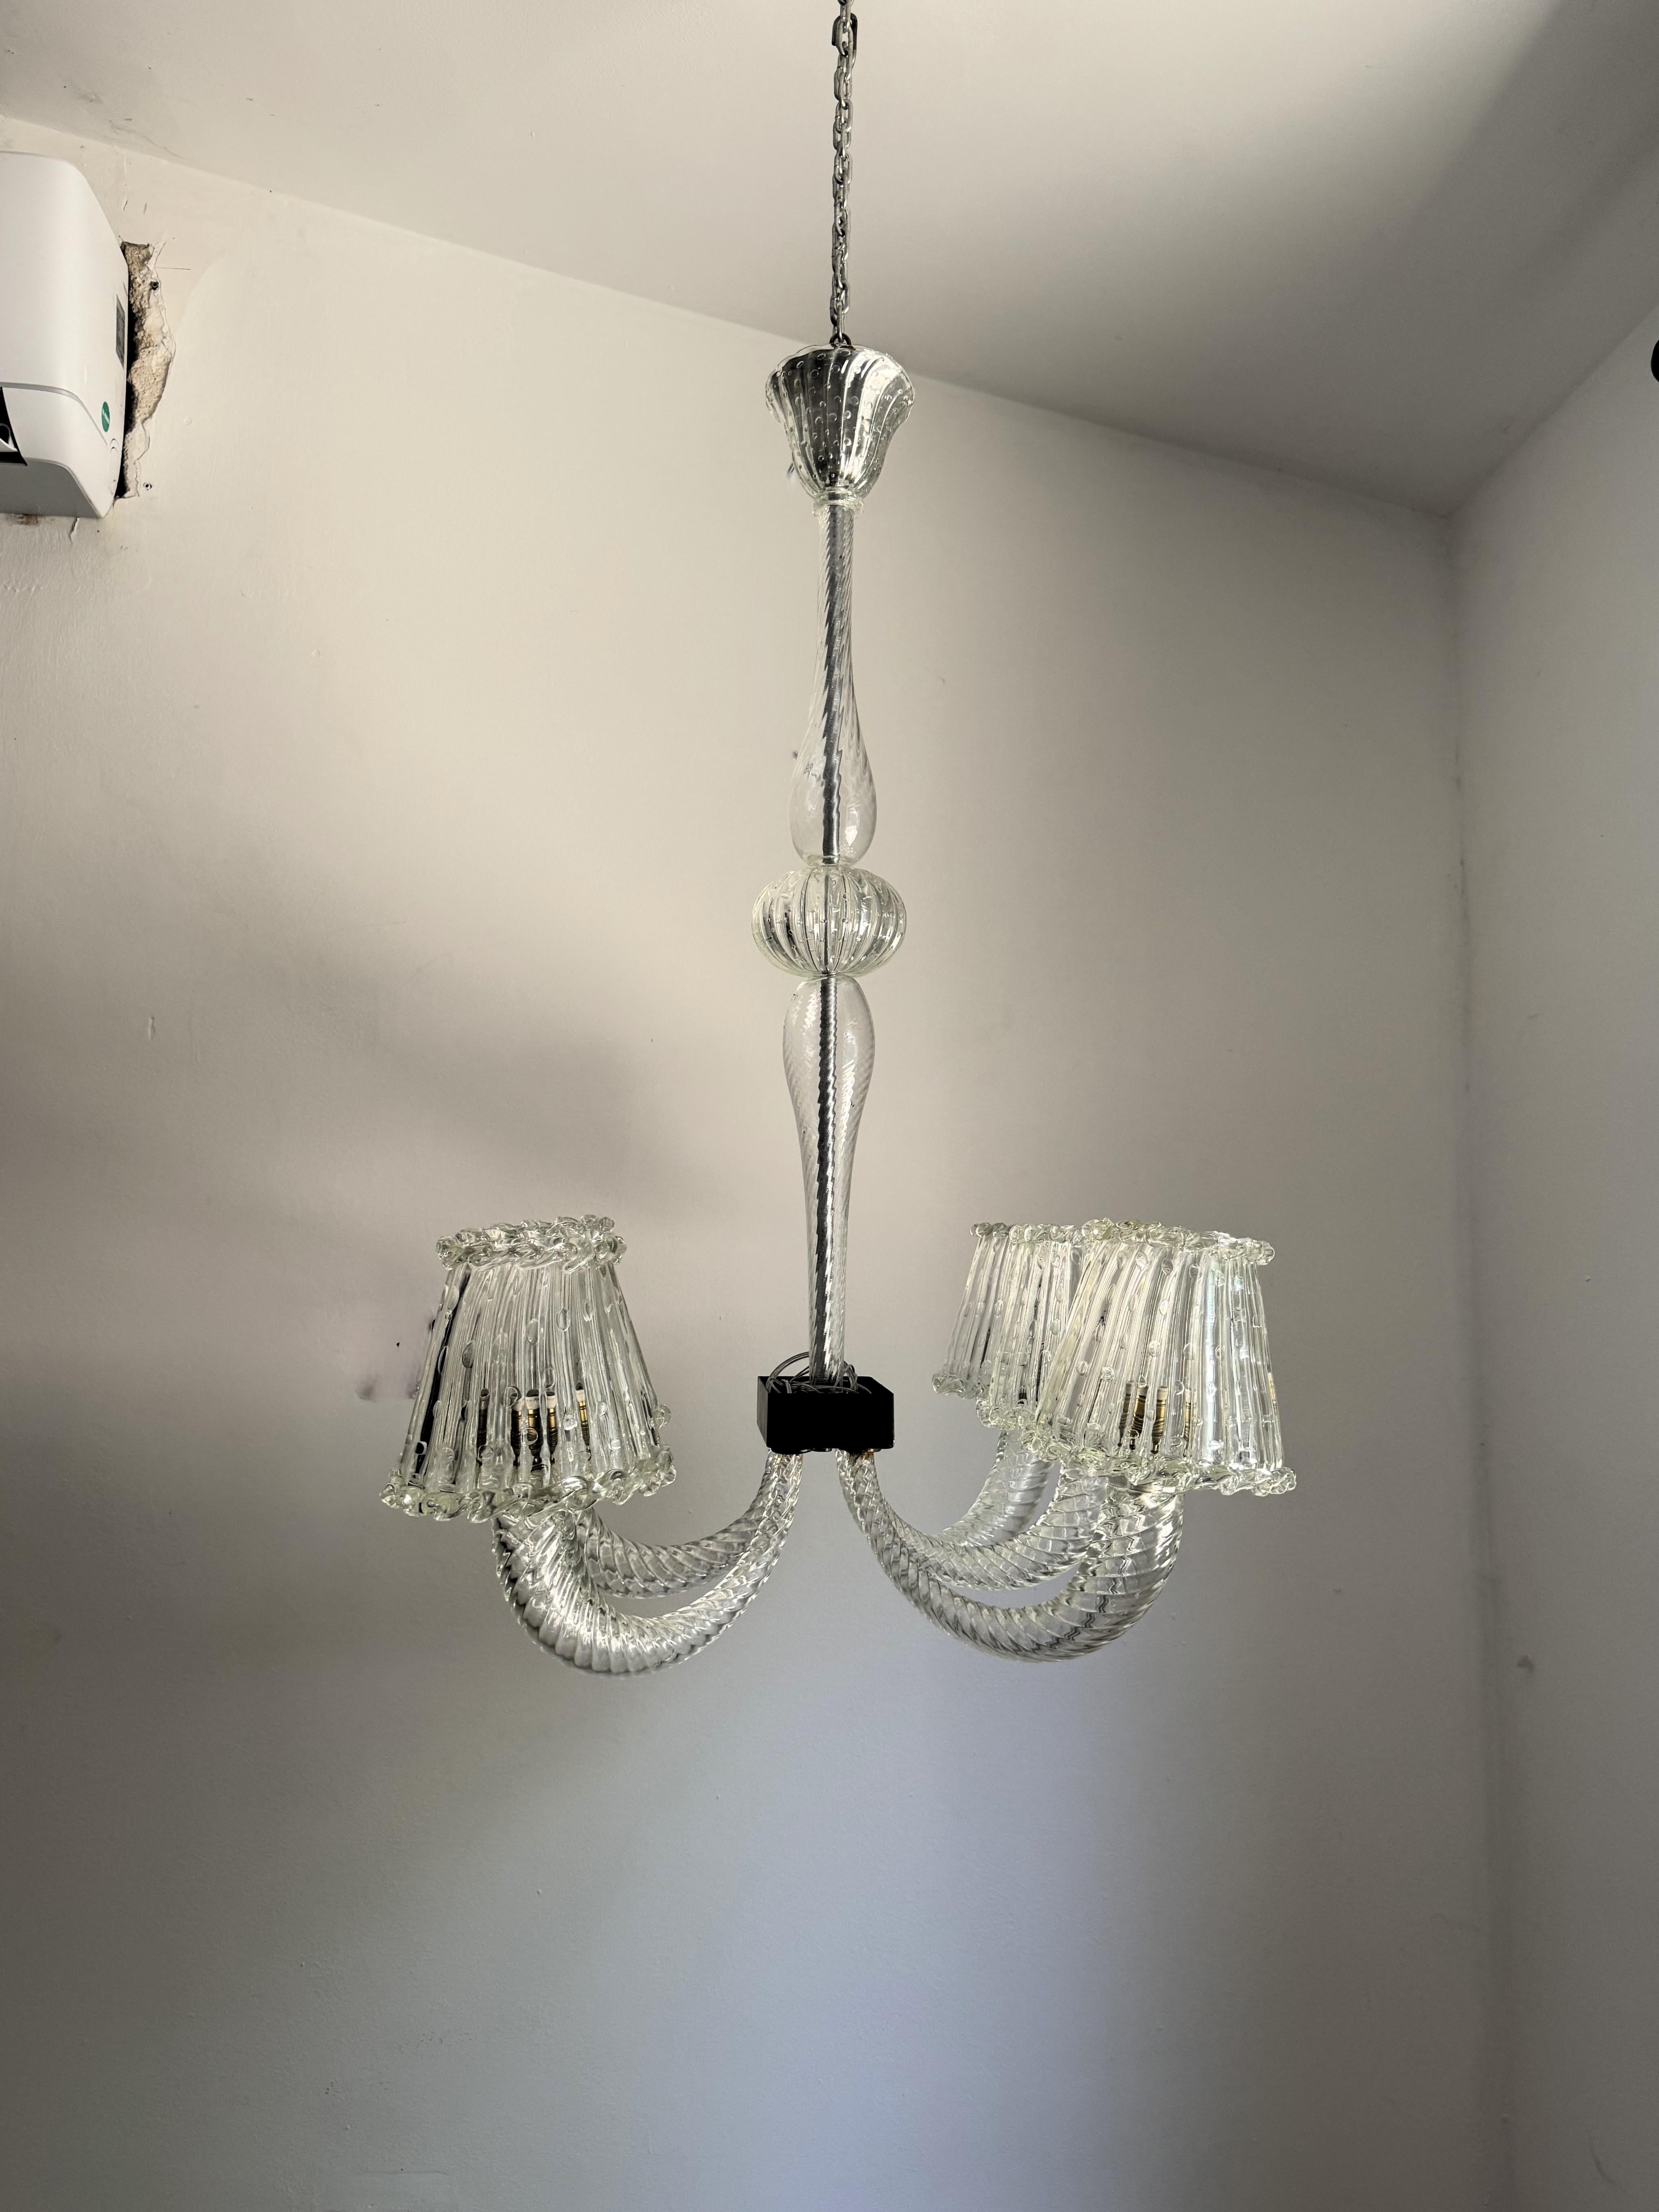 Art Deco Six Light Chandelier Attr. Barovier & Toso, Murano, Italy ca. 1930 For Sale 4